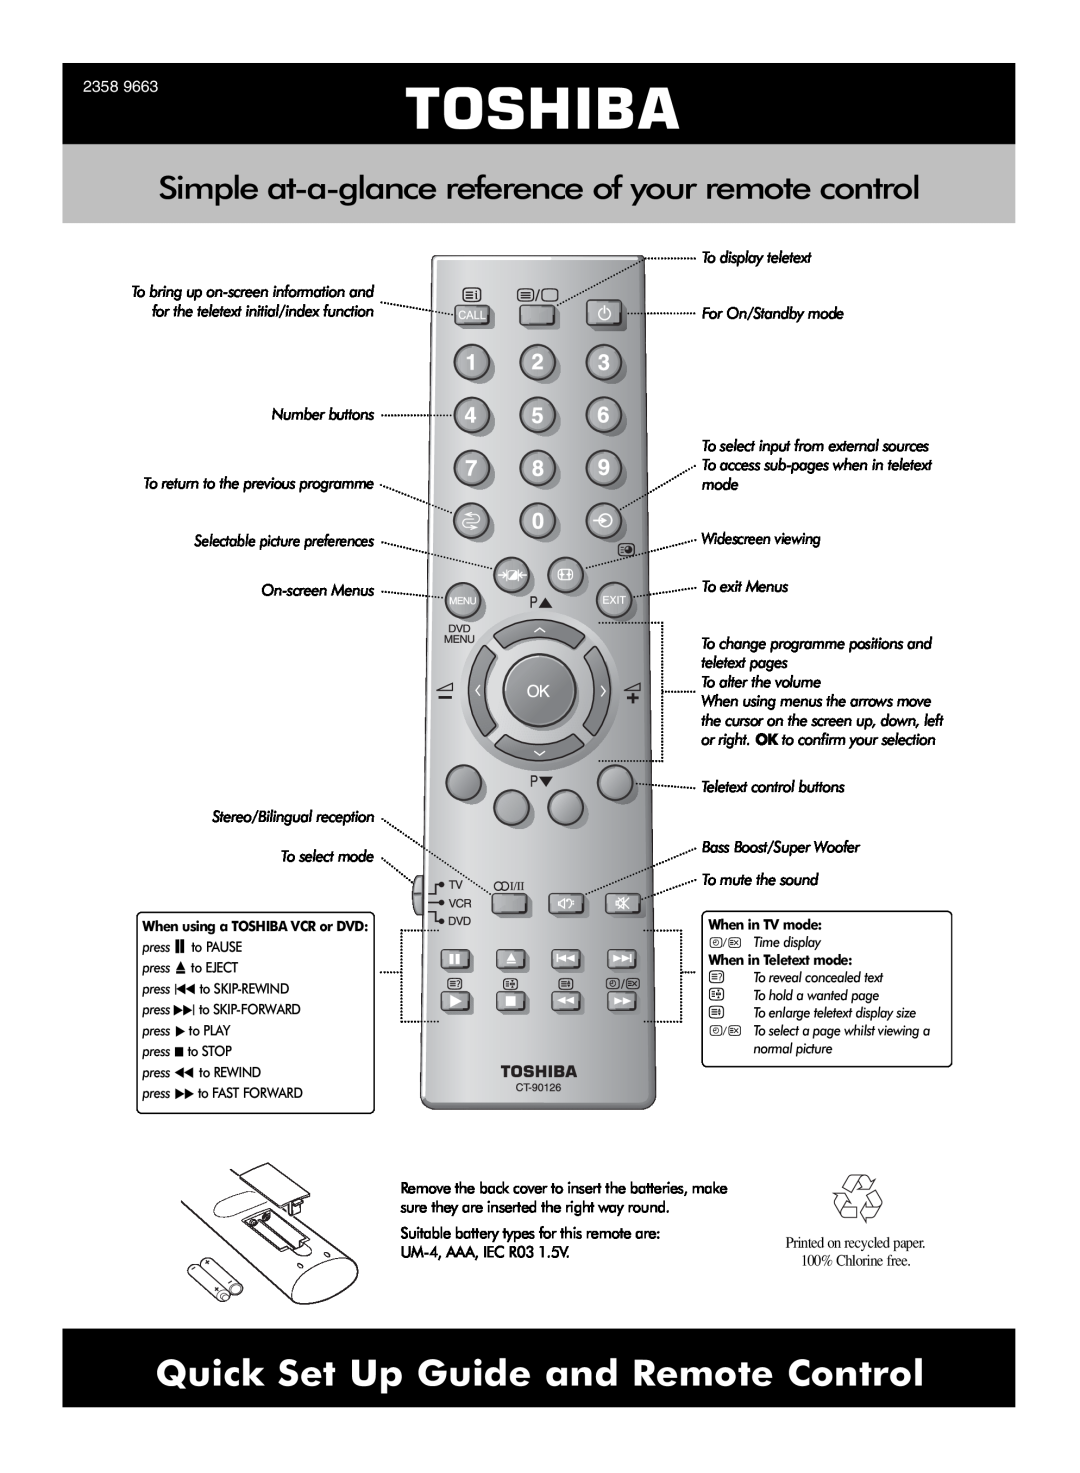 Toshiba 2358 setup guide Toshiba, Quick Set Up Guide and Remote Control, When using a TOSHIBA VCR or DVD, When in TV mode 